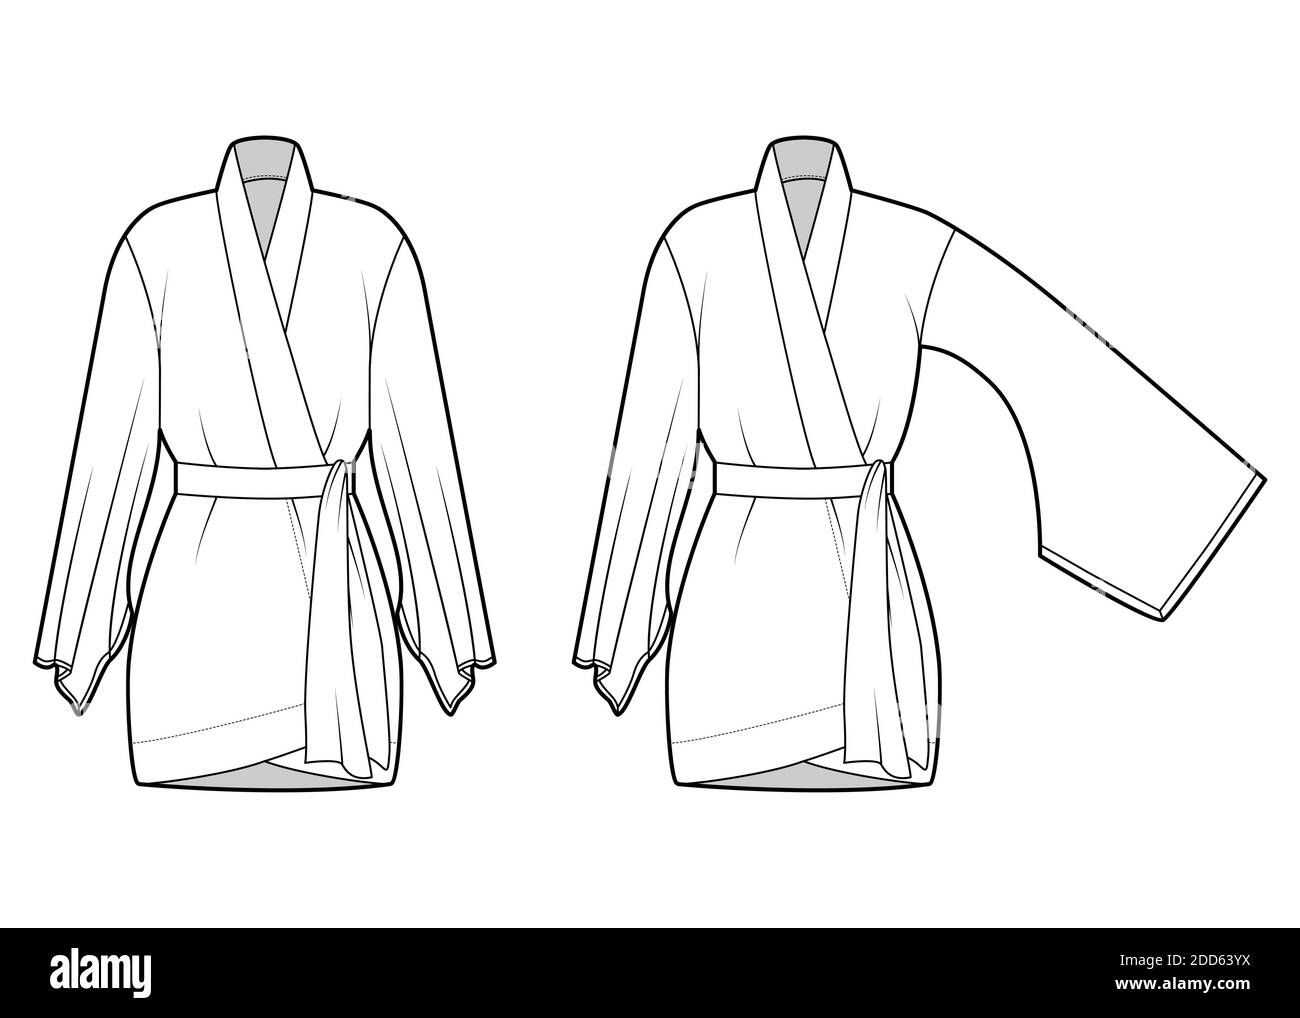 Set of Kimono robe technical fashion illustration with long wide sleeves,  belt to cinch the waist,